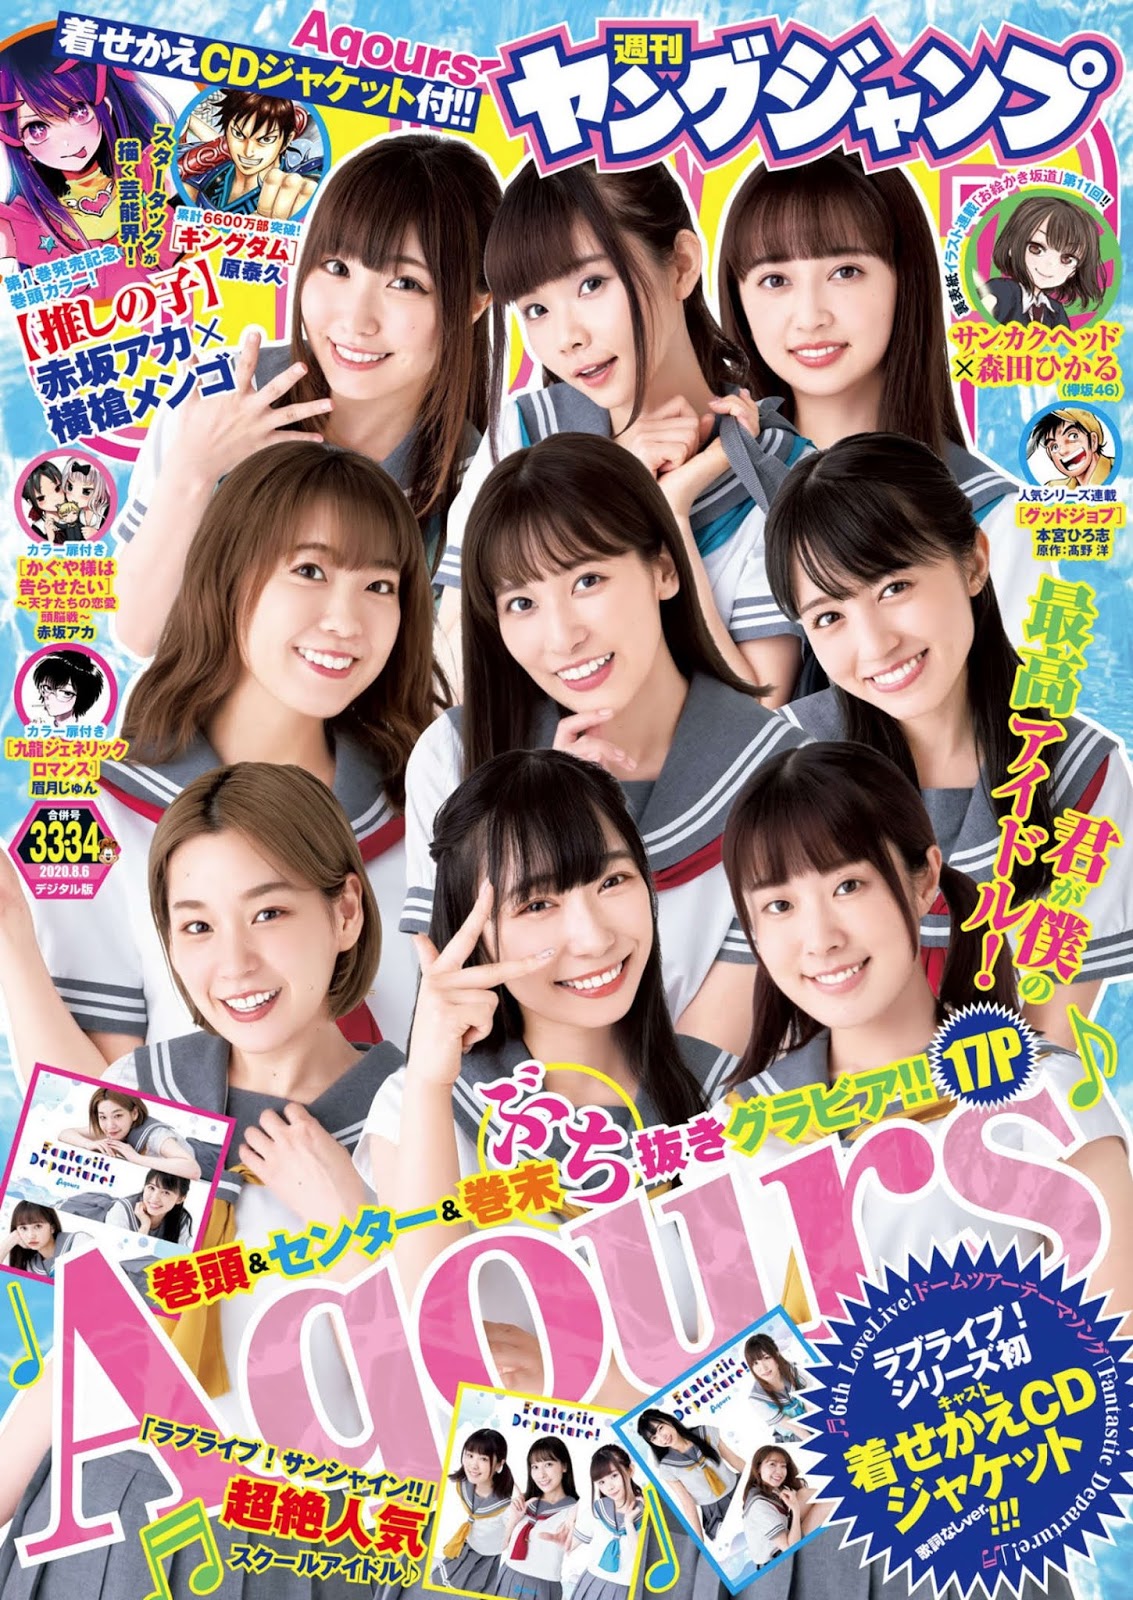 Aqours (アクア), Young Jump 2020 No.33-34 (ヤングジャンプ 2020年33-34号)